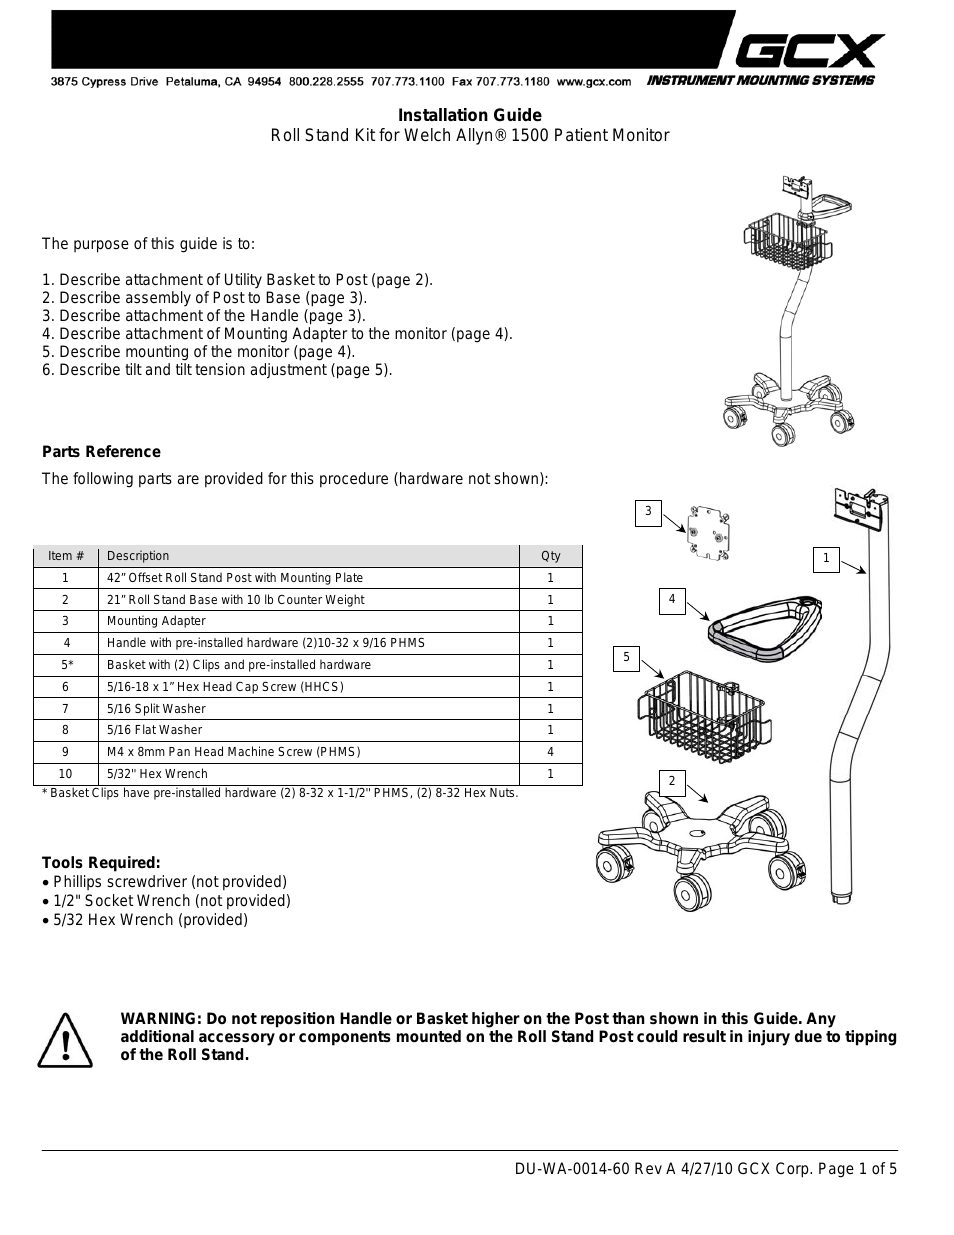 Roll Stand Kit for 1500 Patient Monitor - Installation Guide